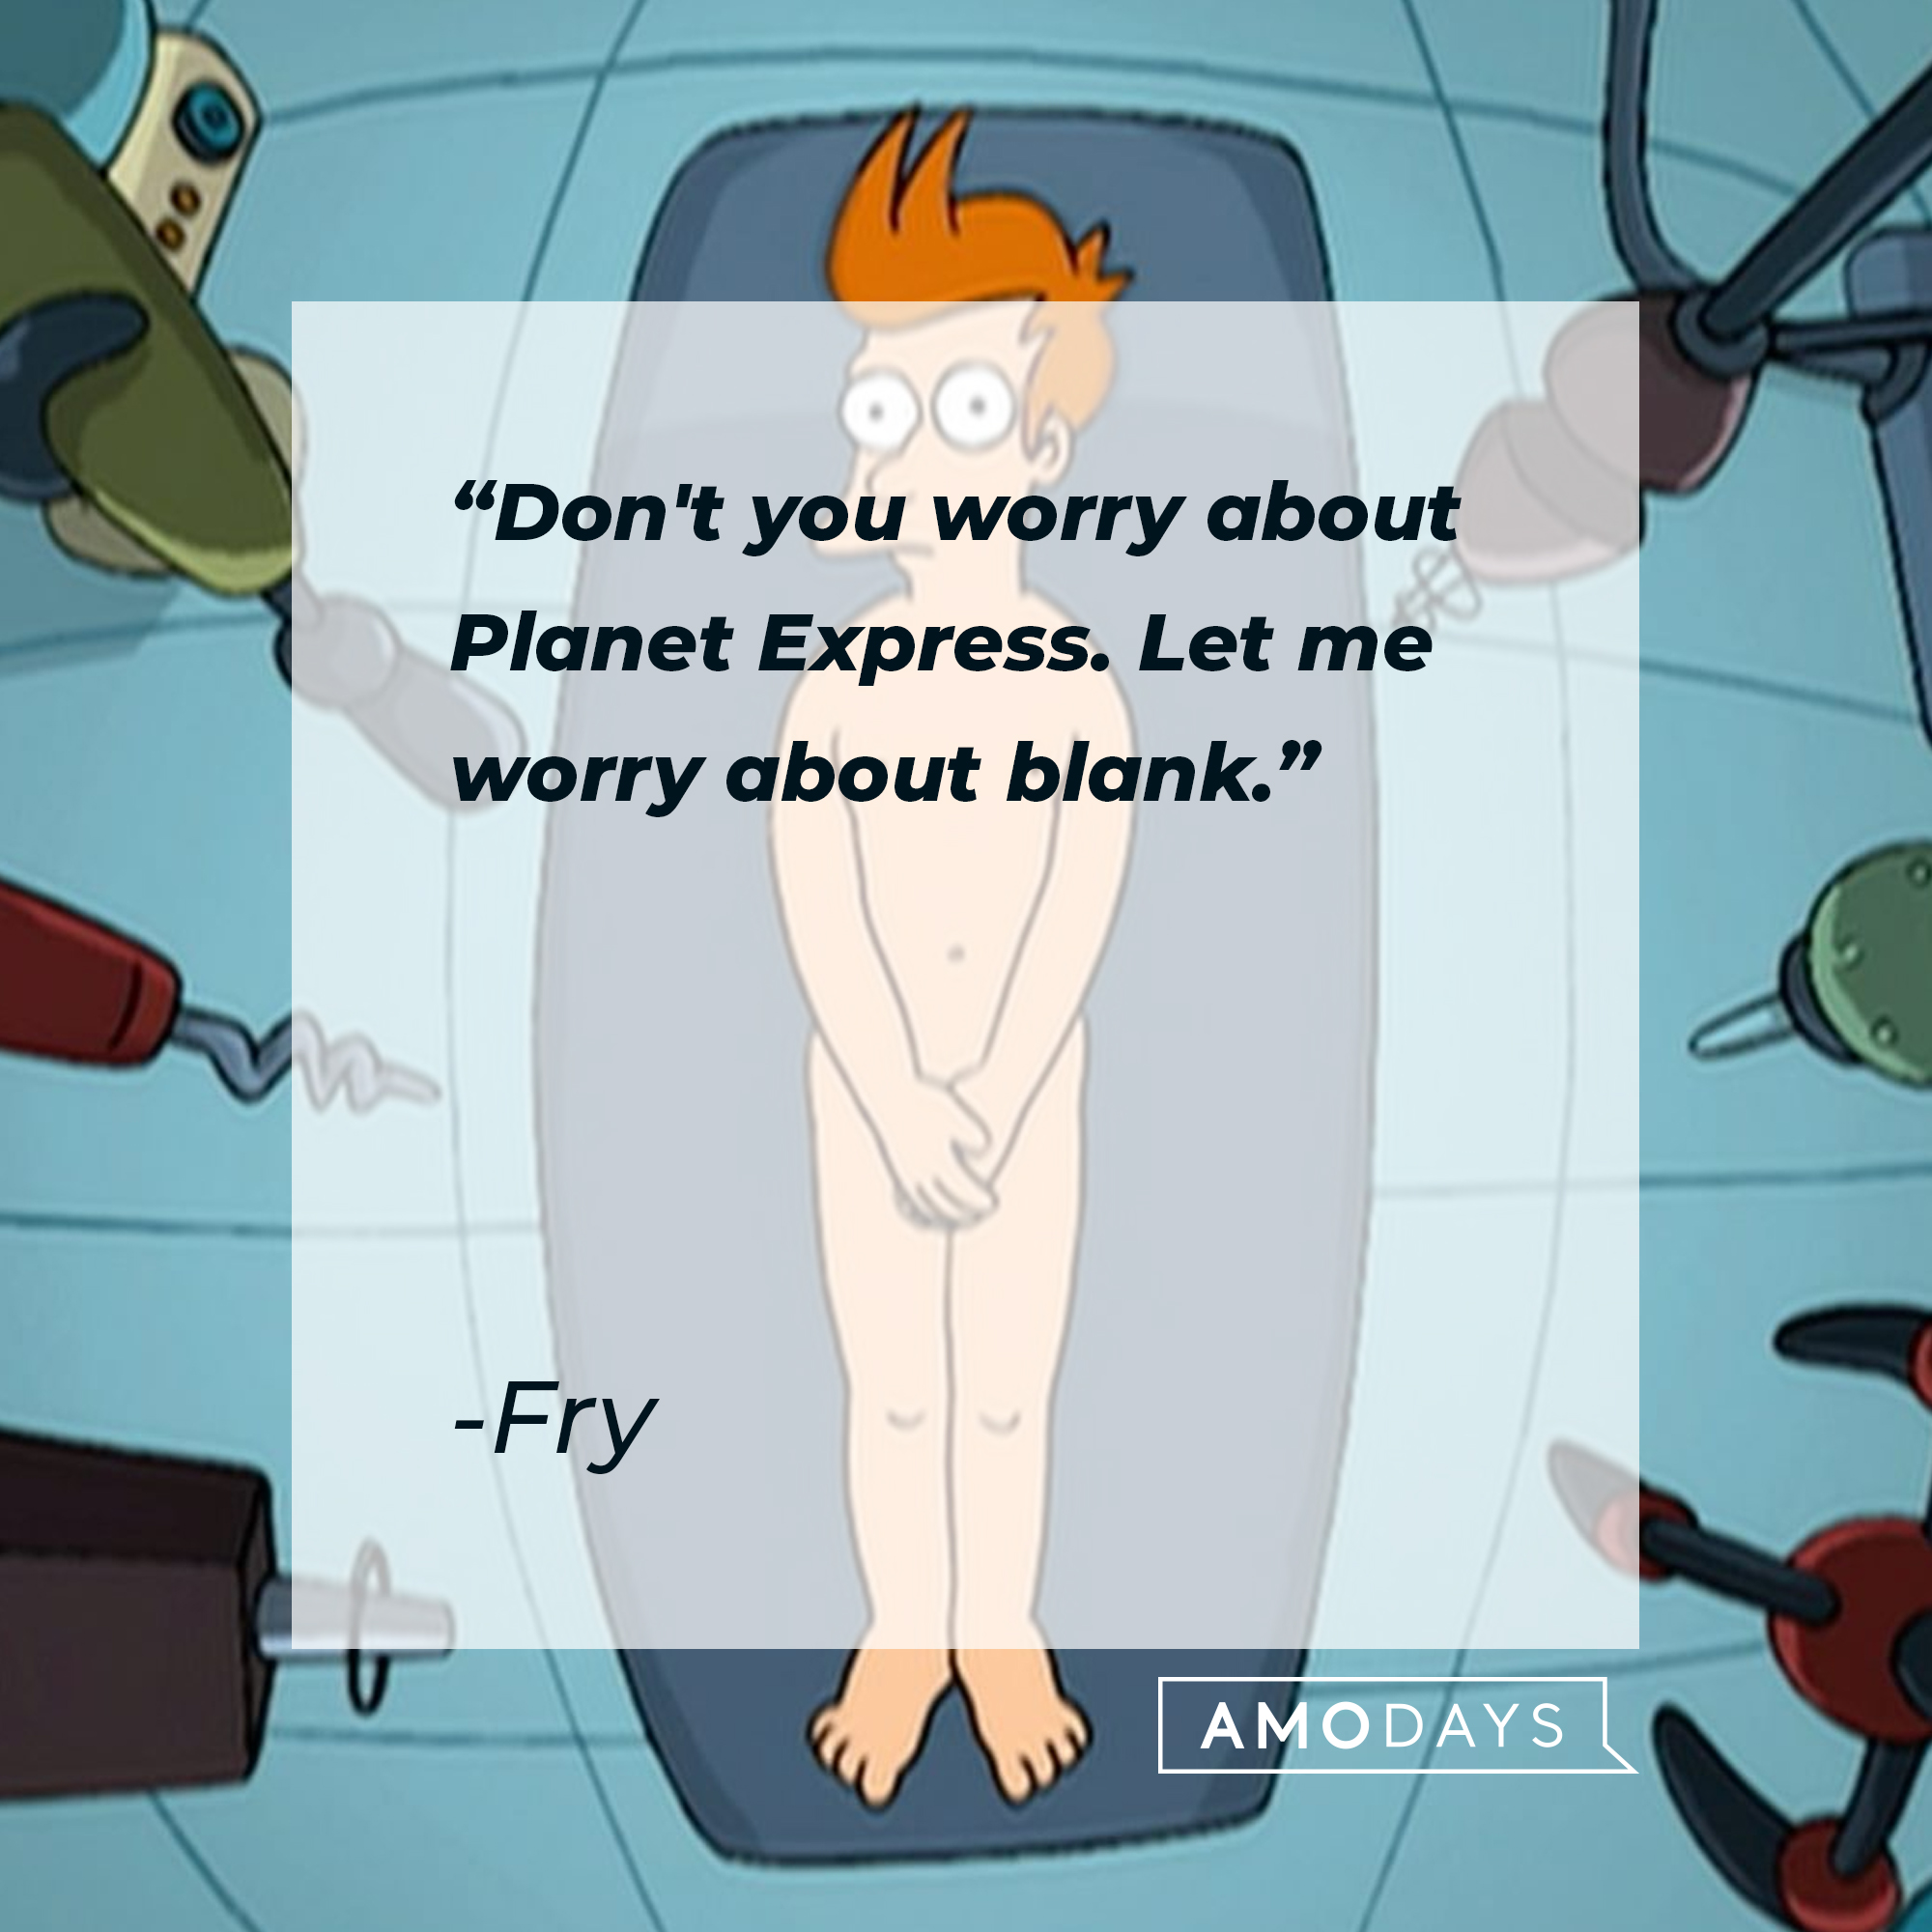 Fry Futurama's quote: "Don't you worry about Planet Express. Let me worry about blank." | Source: Facebook.com/Futurama